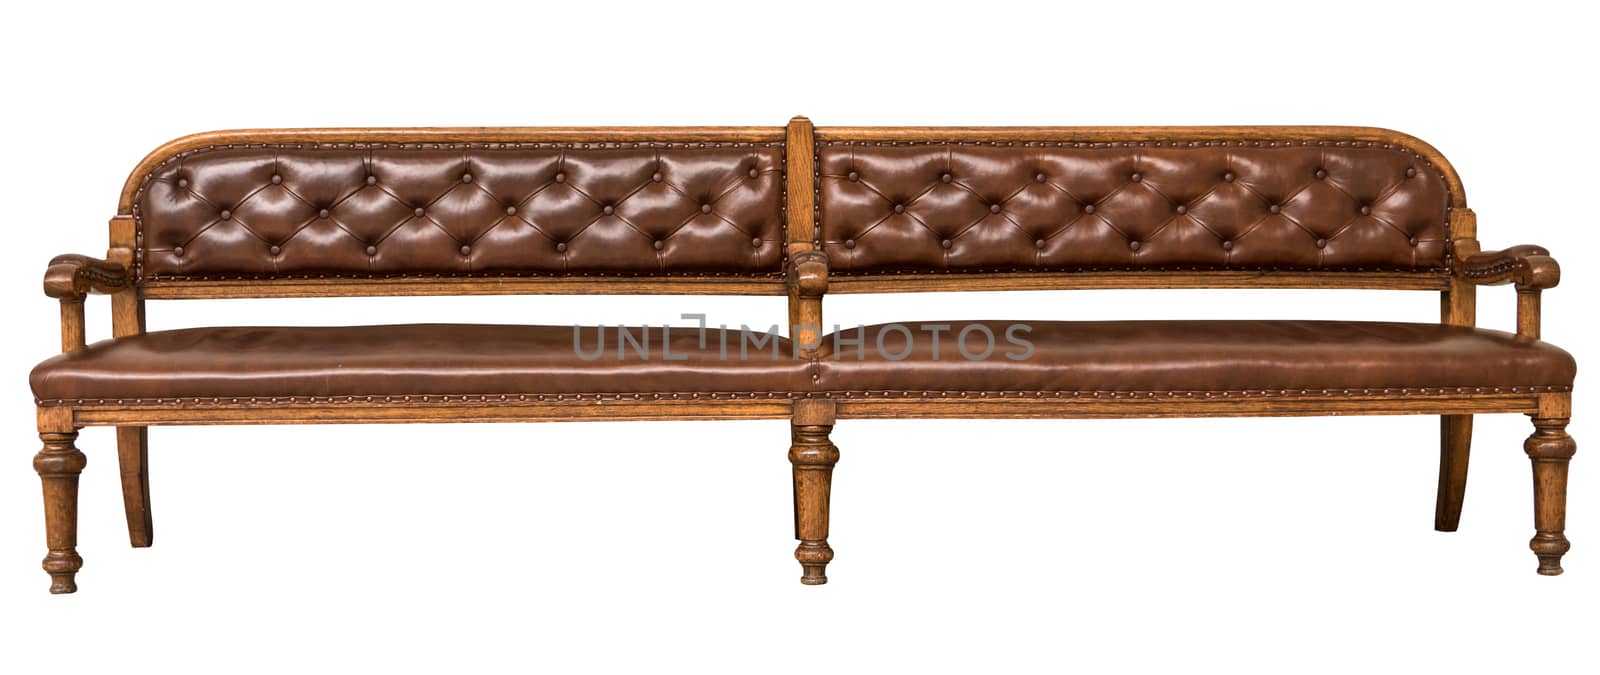 Antique Seat Or Sofa by mrdoomits